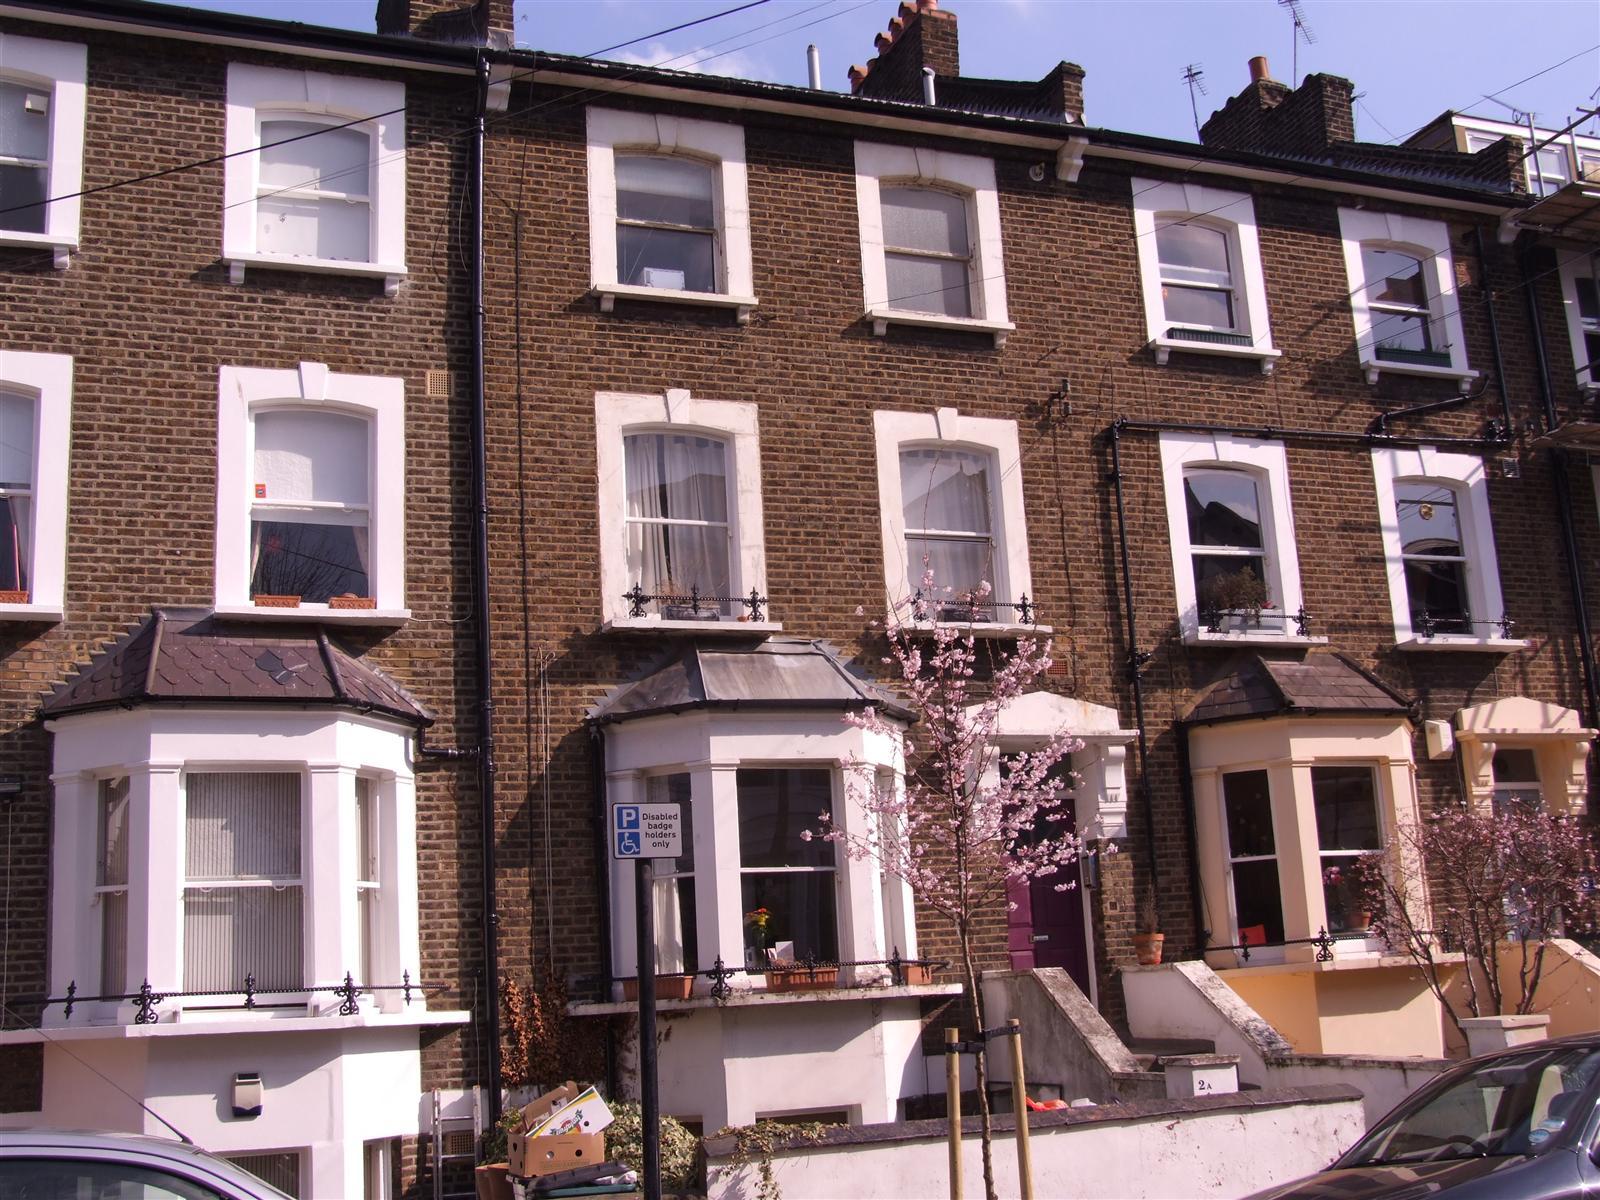 AVAILABLE FROM 16TH OCTOBER 2020 (POSSIBLY SOONER BY AGREEMENT). Located in one of Kentish town's most popular turnings is this exceptionally large split level top floor converted flat. The accommodation comprises of a large double bedroom with built in wardrobes, large kitchen/diner with ...